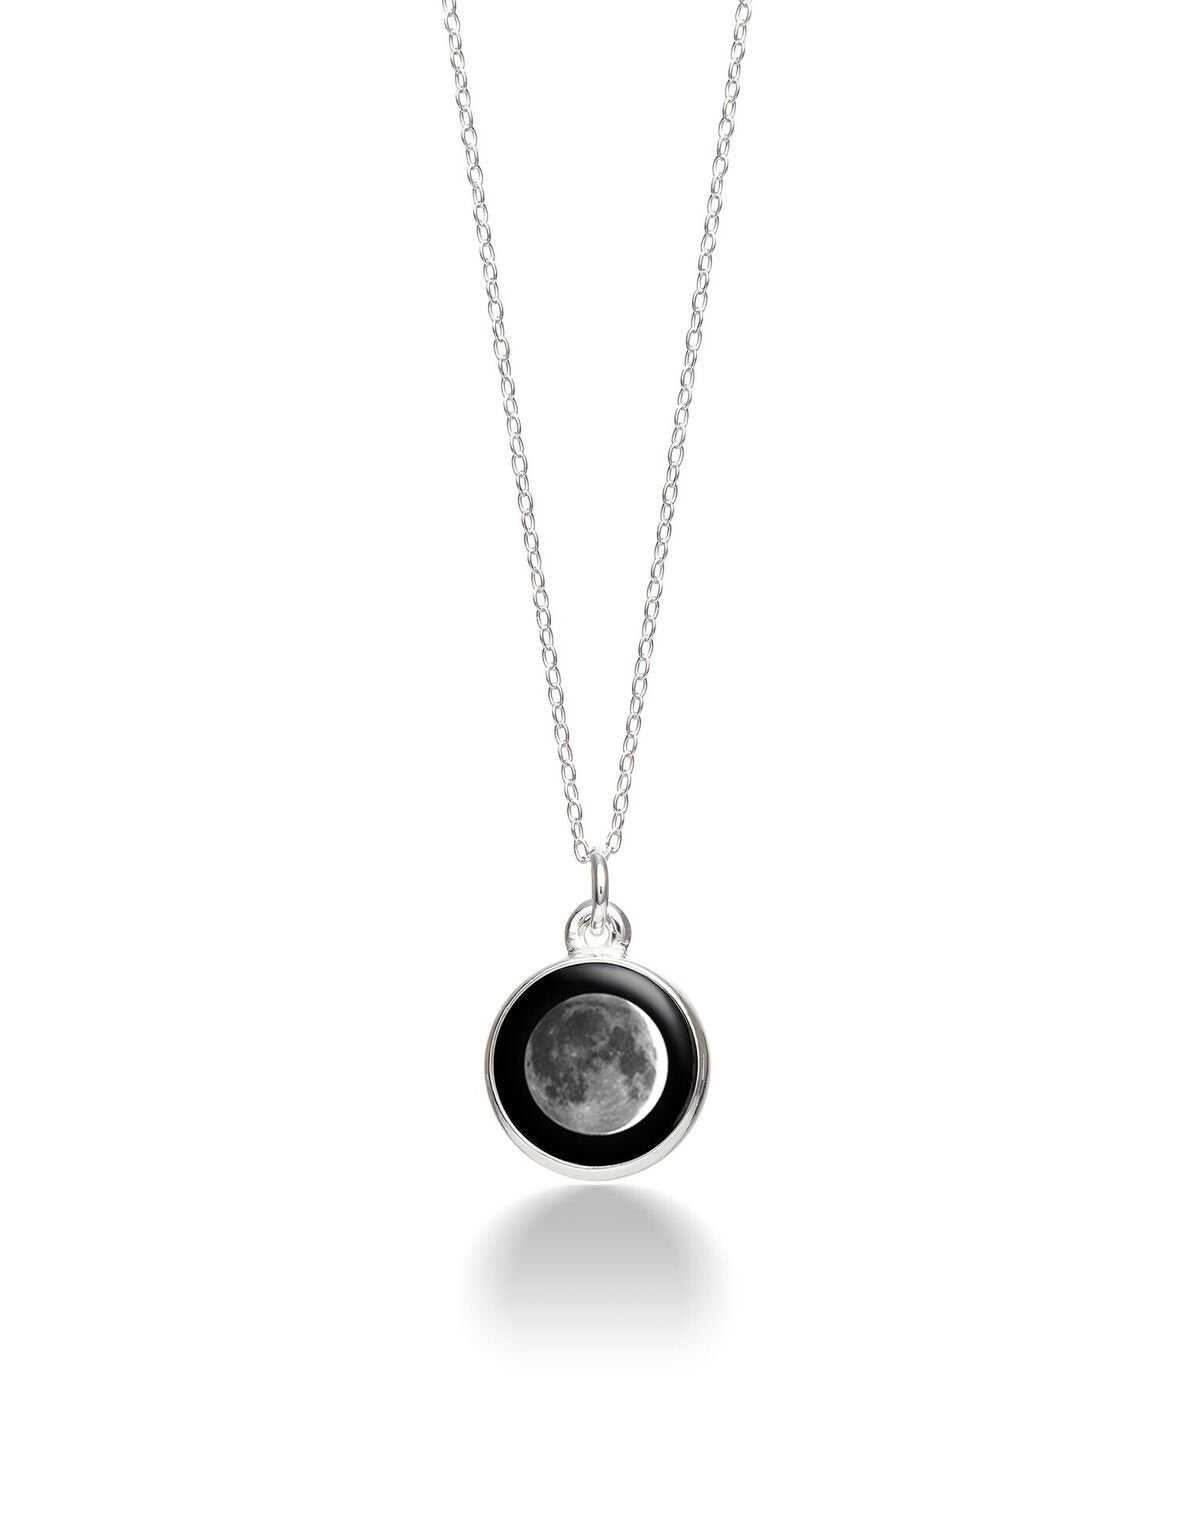 MOONGLOW - CHARMED SIMPLICITY NECKLACE (CA) - Molly's! A Chic and Unique Boutique 